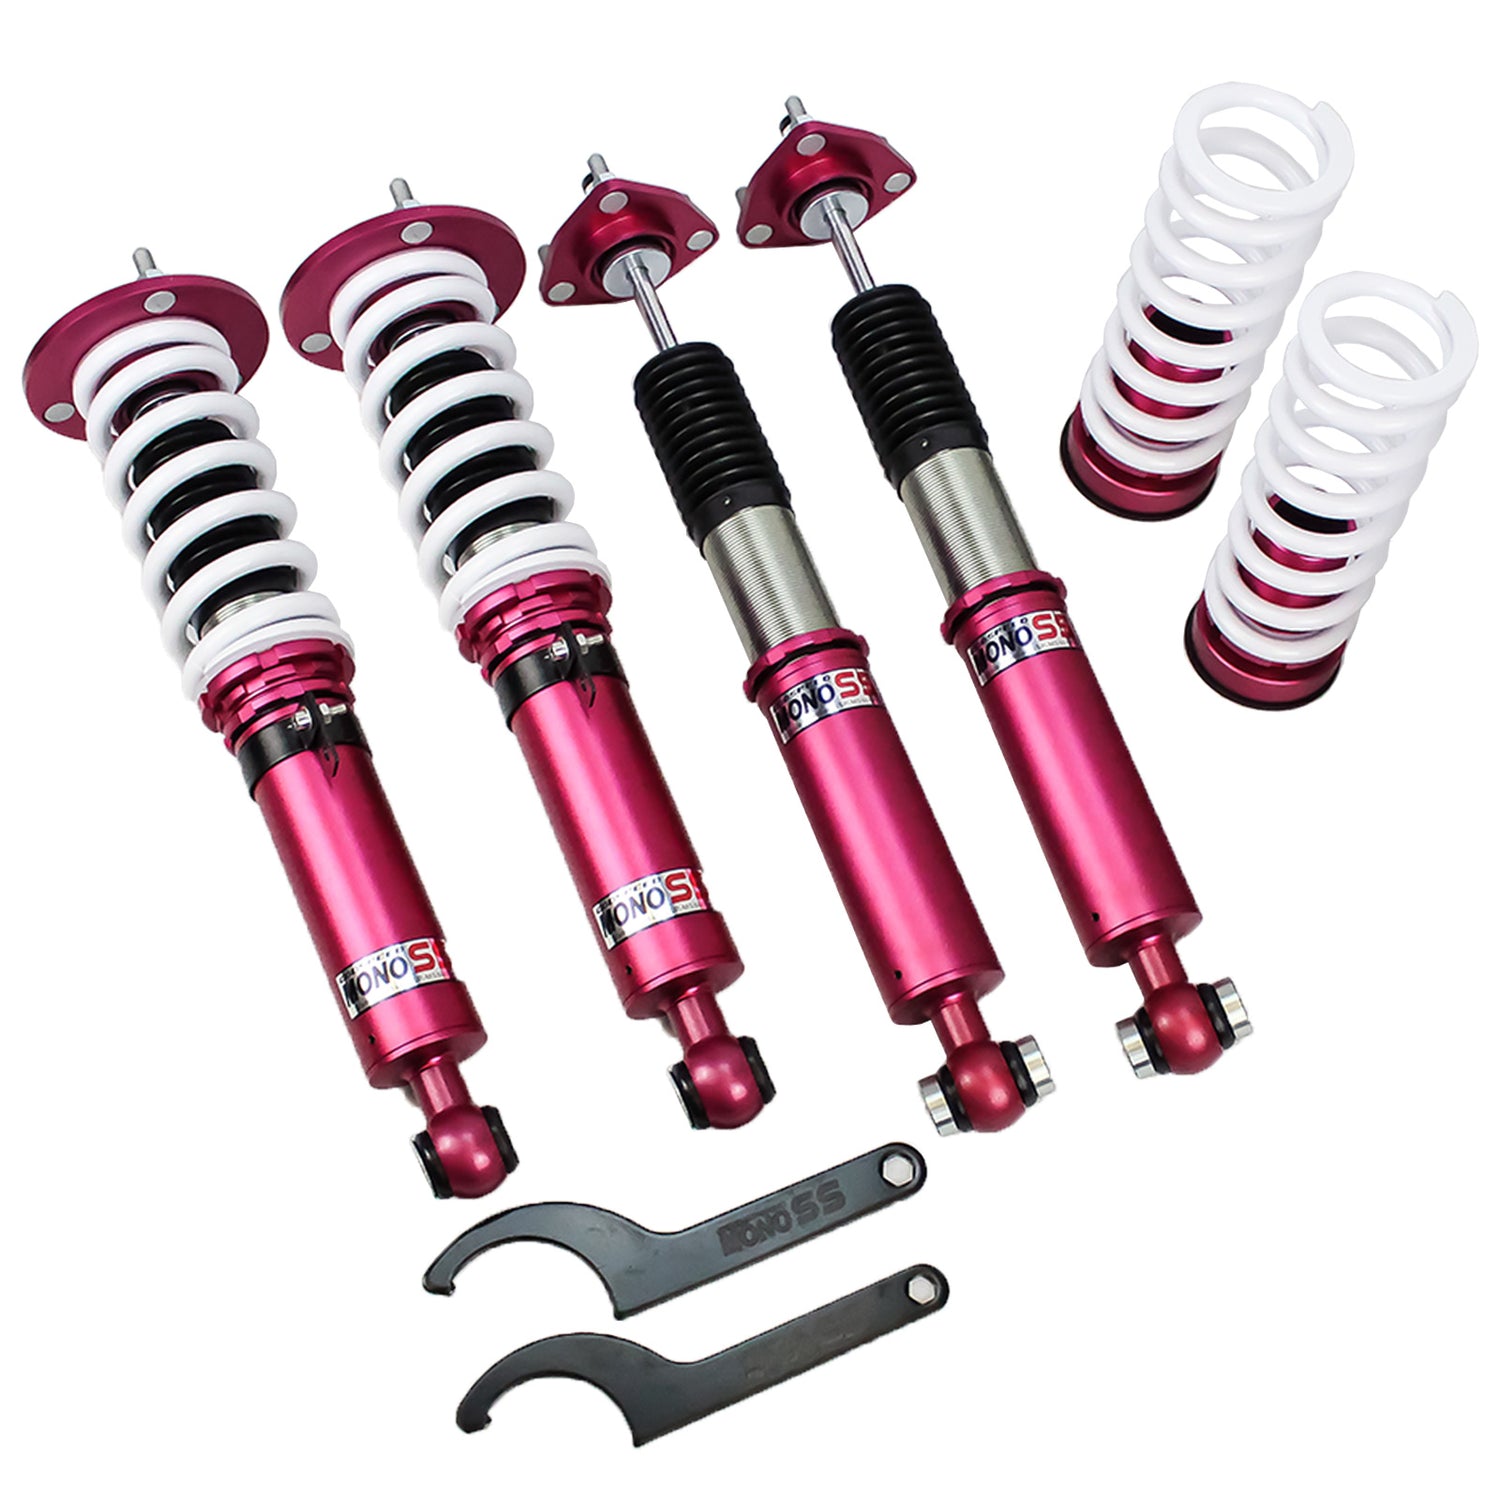 Godspeed MSS0117 MonoSS Coilover Lowering Kit, Fully Adjustable, Ride Height, Spring Tension And 16 Click Damping, Lexus IS200T/IS300/IS250/IS350(XE30) RWD 2014-18